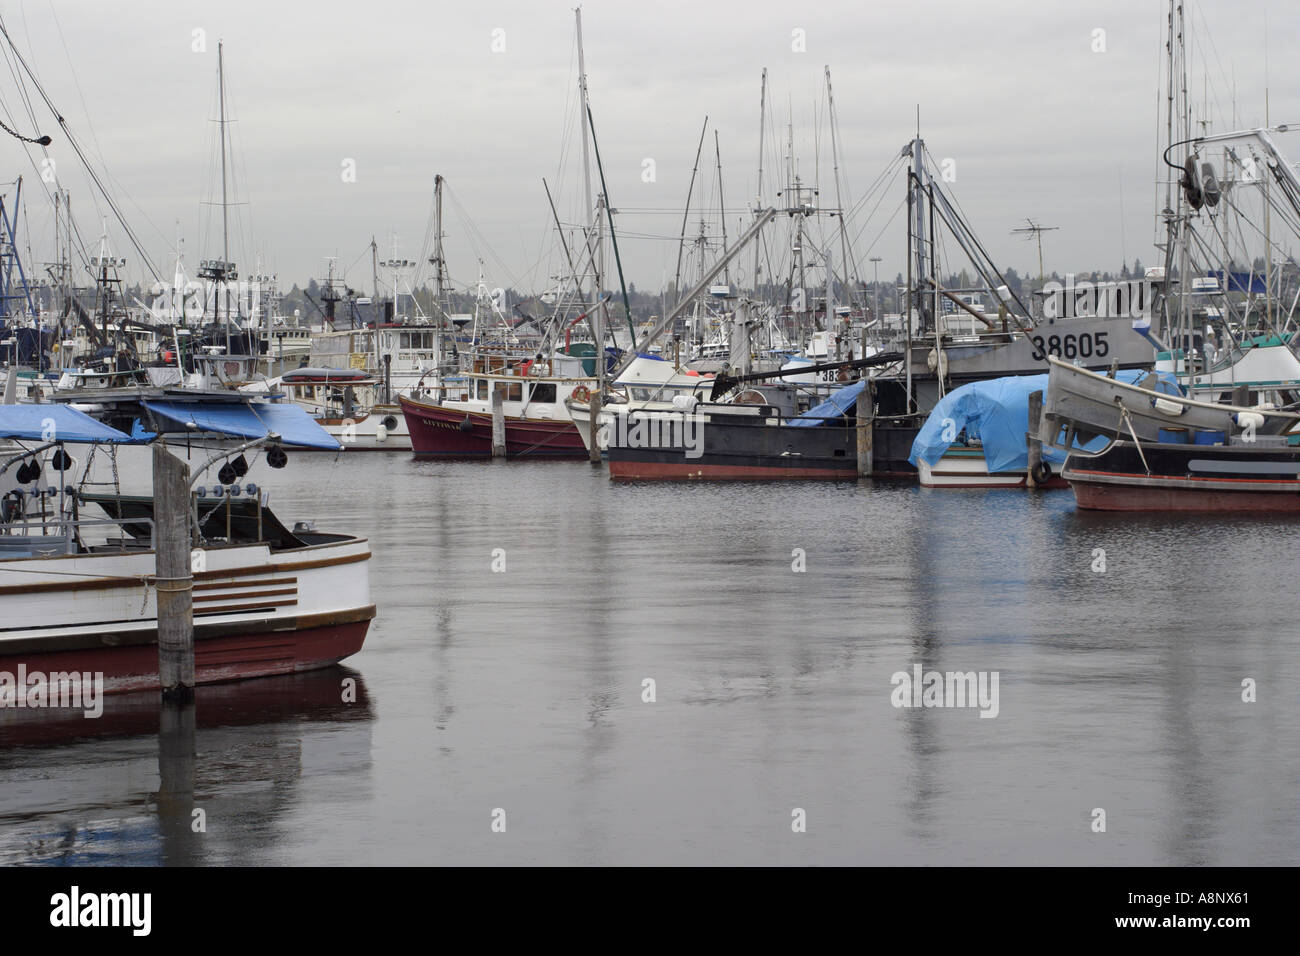 https://c8.alamy.com/comp/A8NX61/commercial-fishing-boots-moored-at-fishermans-terminal-in-seattle-A8NX61.jpg